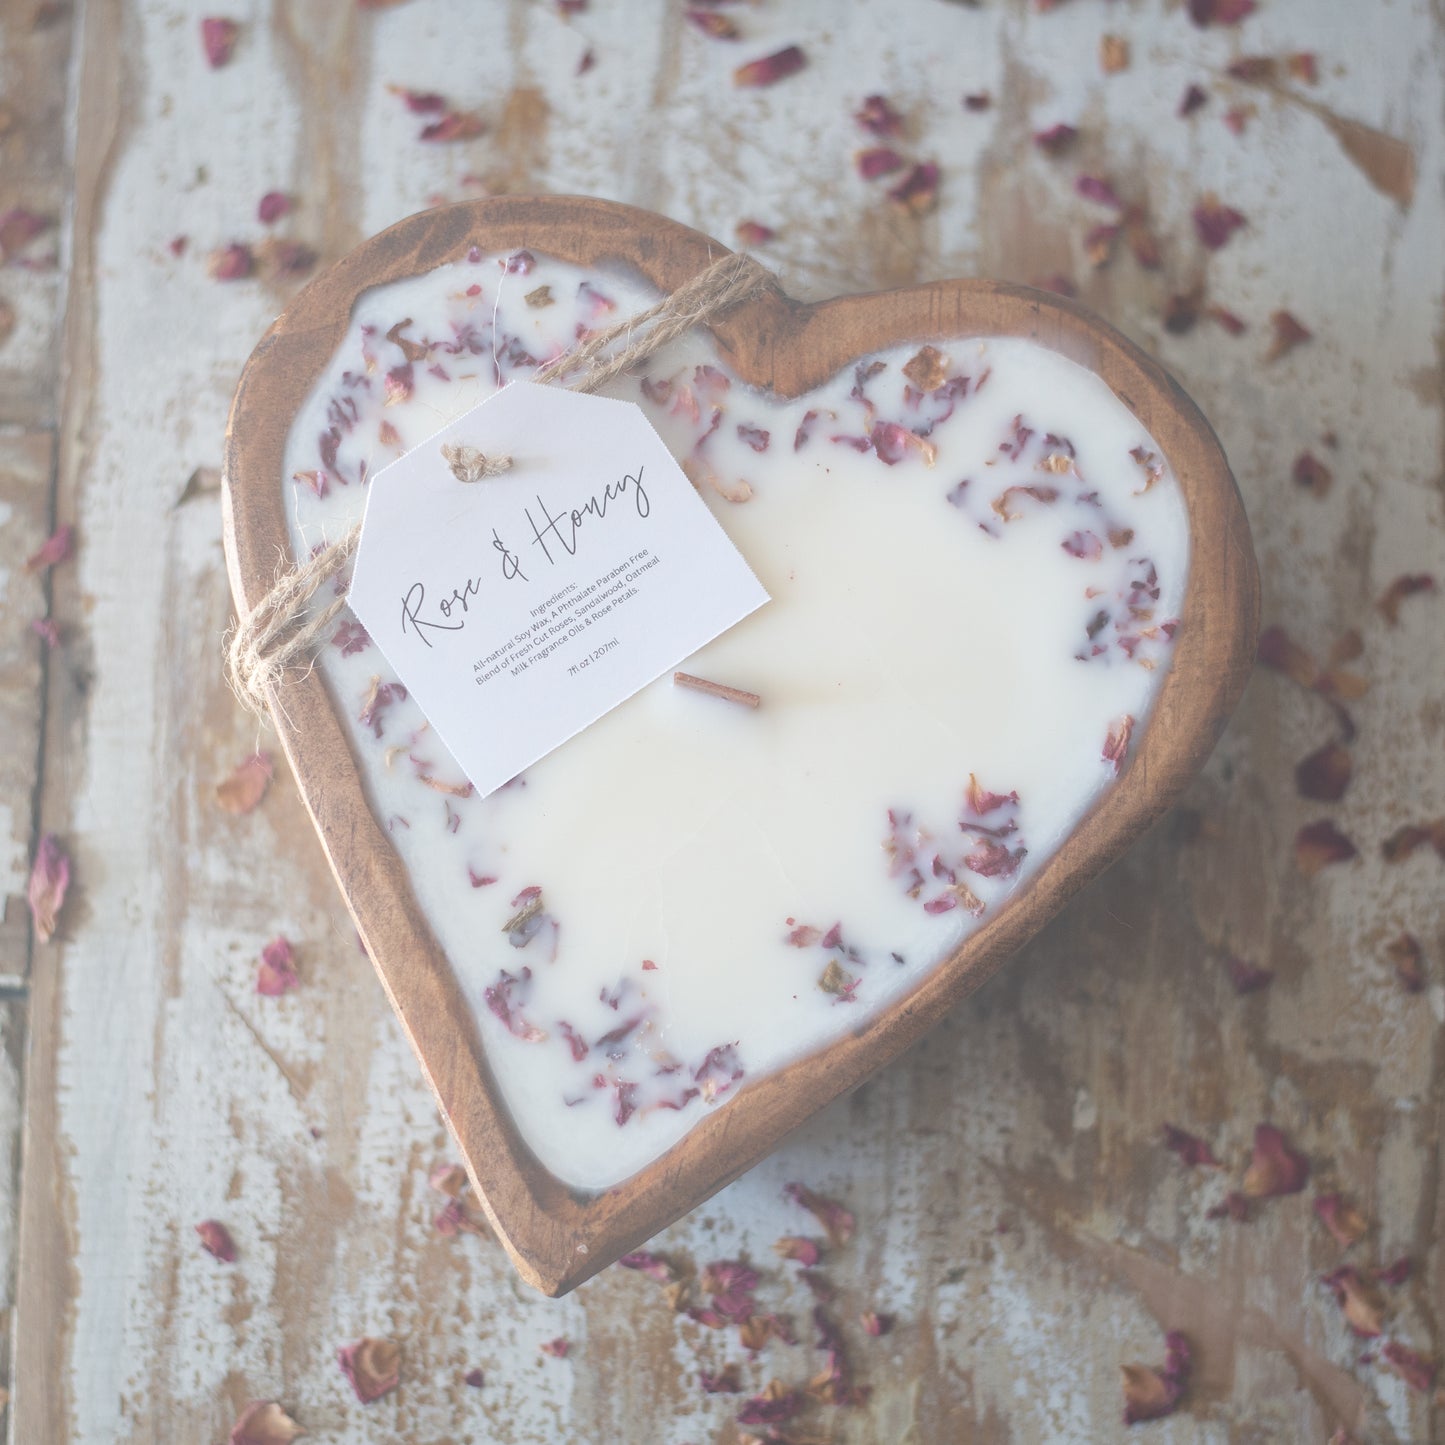 Rose & Honey Heart Shaped Wooden Dough Bowl Candle